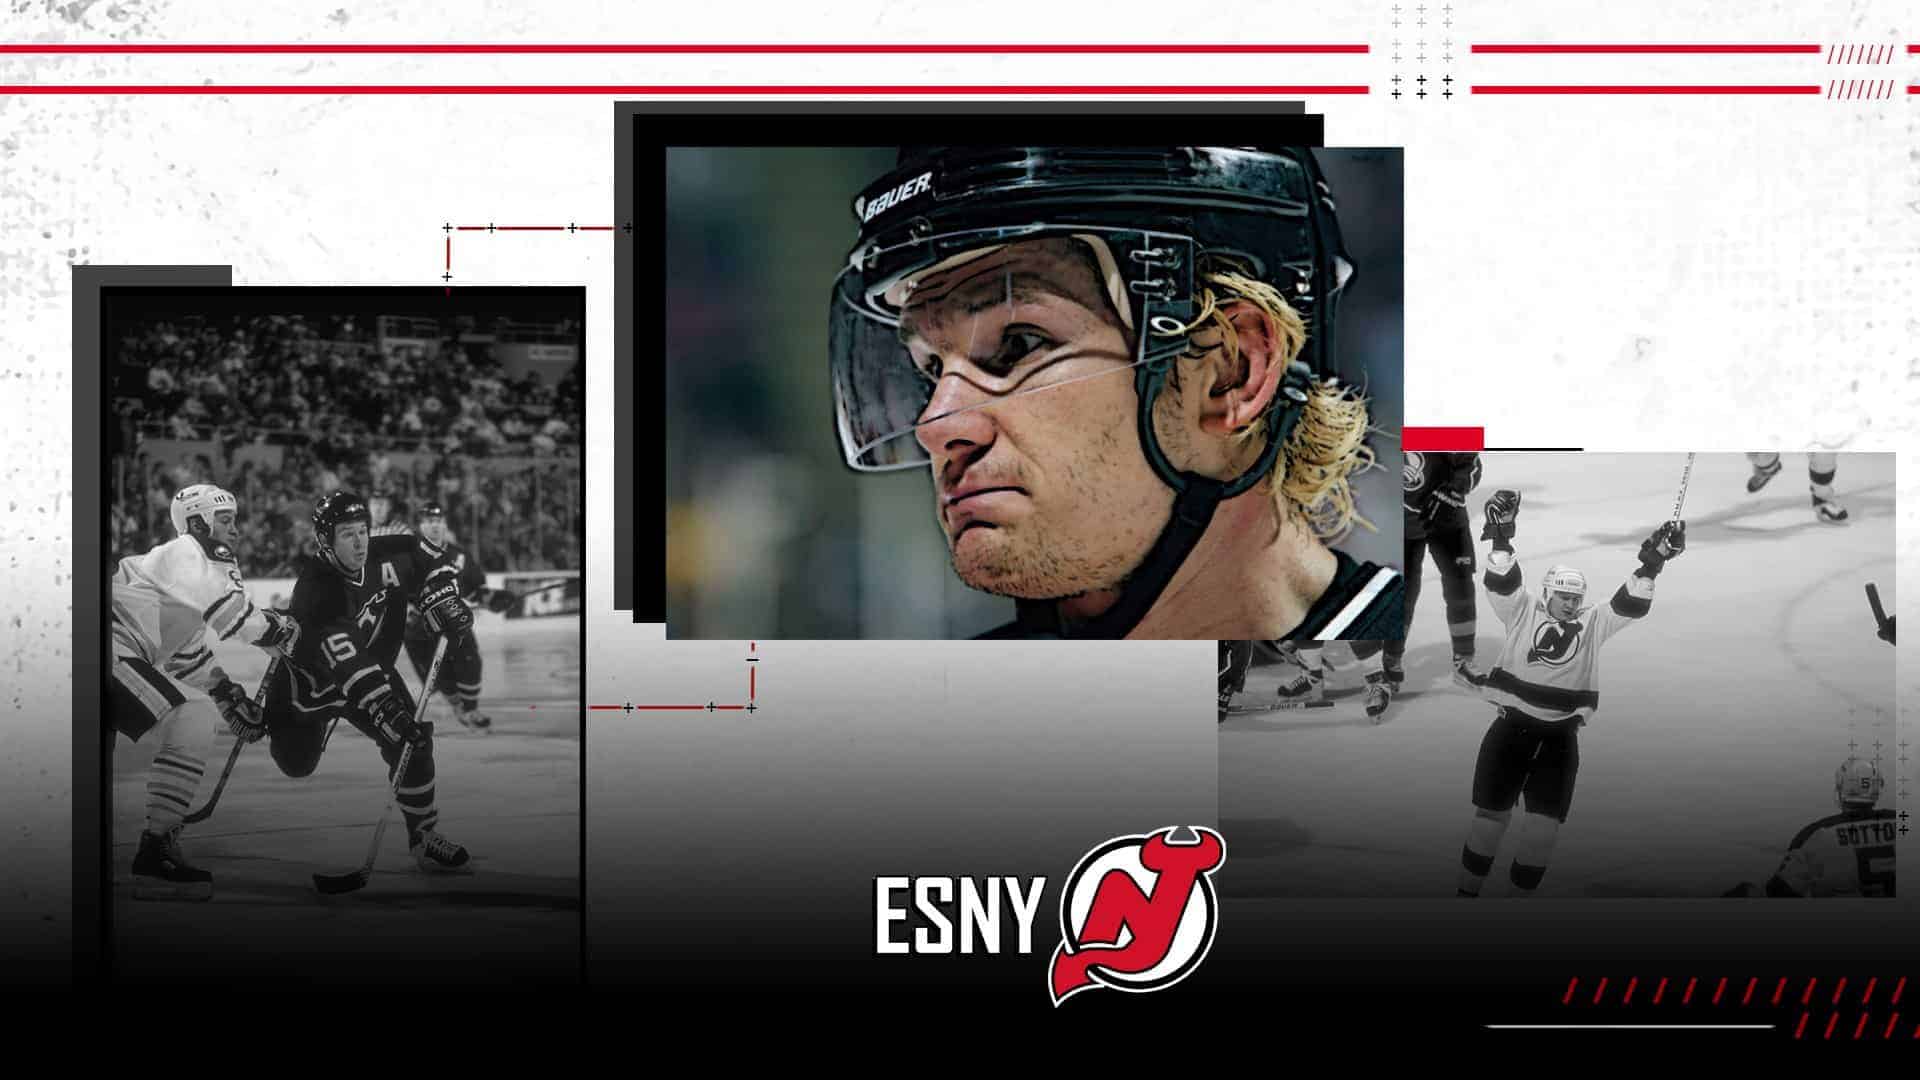 the history of the new jersey devils